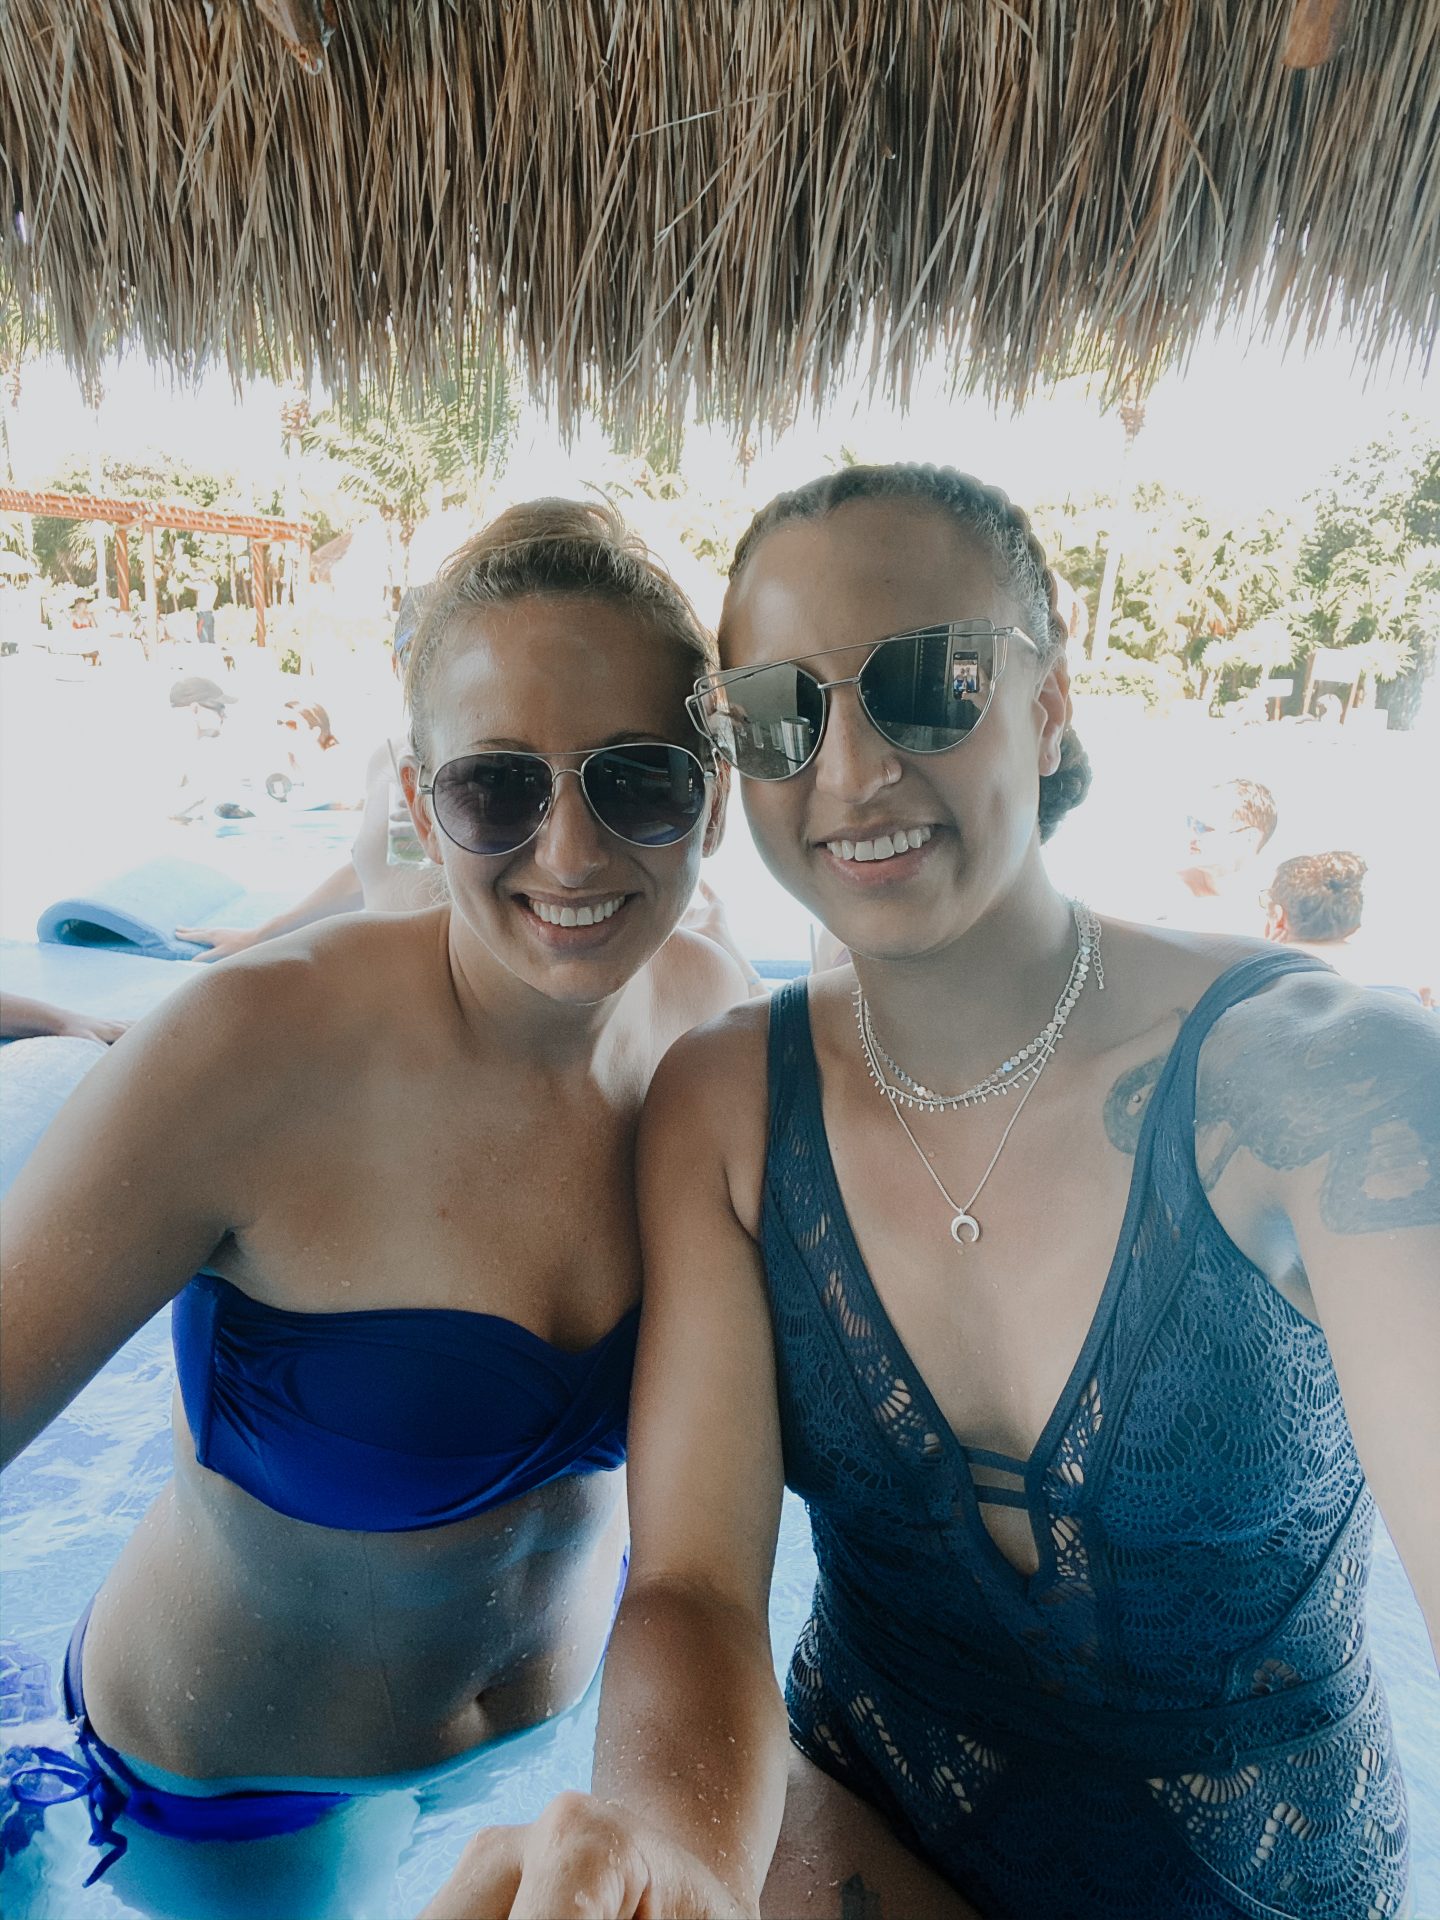 image of two women smiling, both wearing blue swimsuits next to a pool.